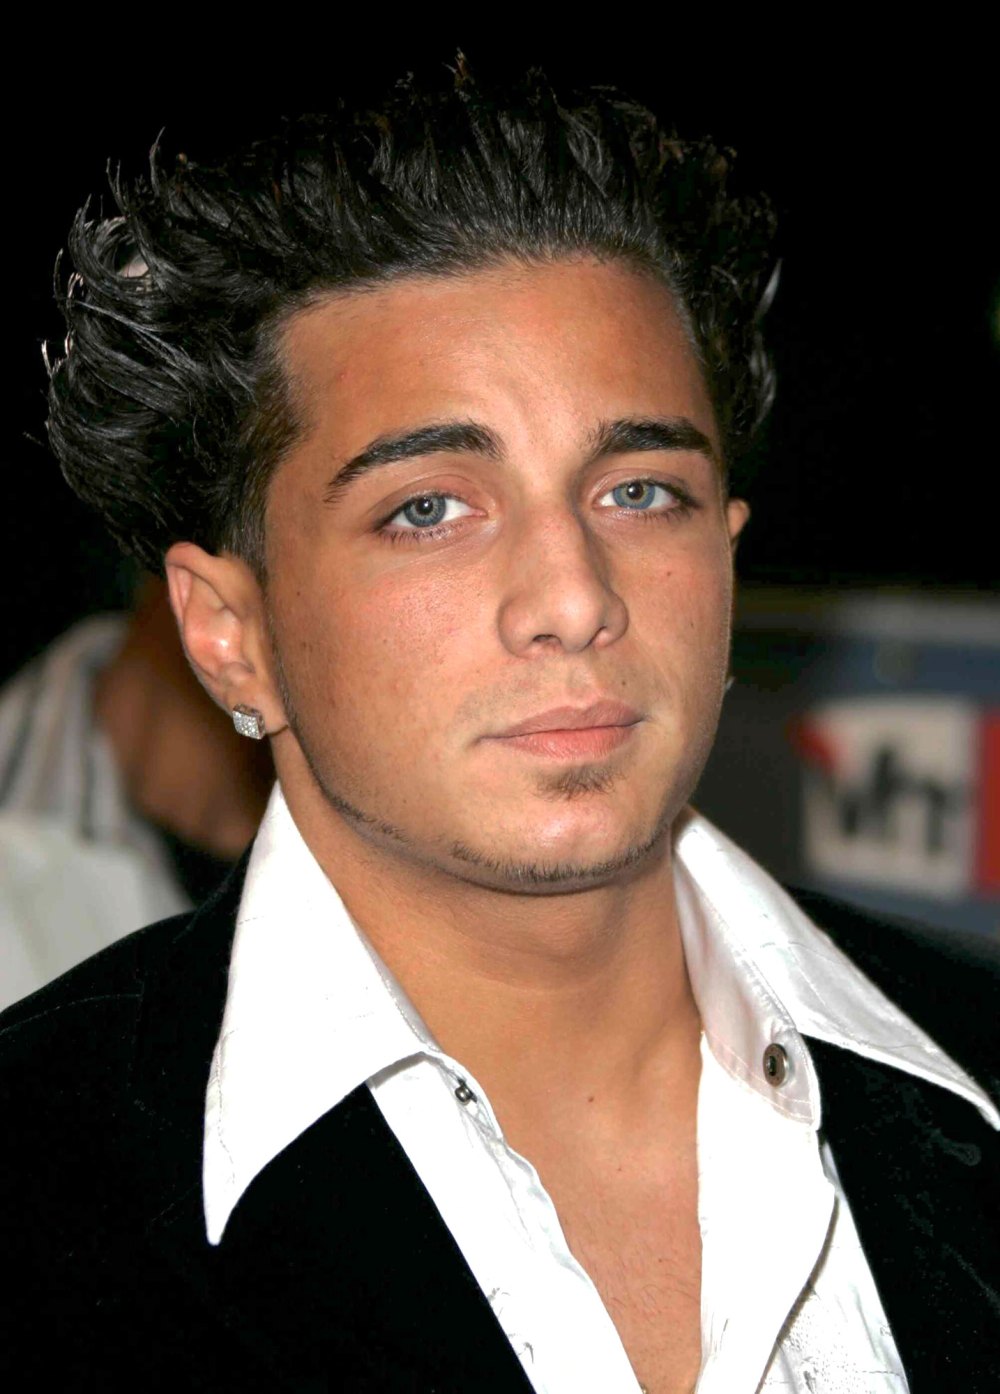 Growing Up Gotti Star John Gotti Agnello Marries, Pulls in $2.5 Million From Guests: Report 2005